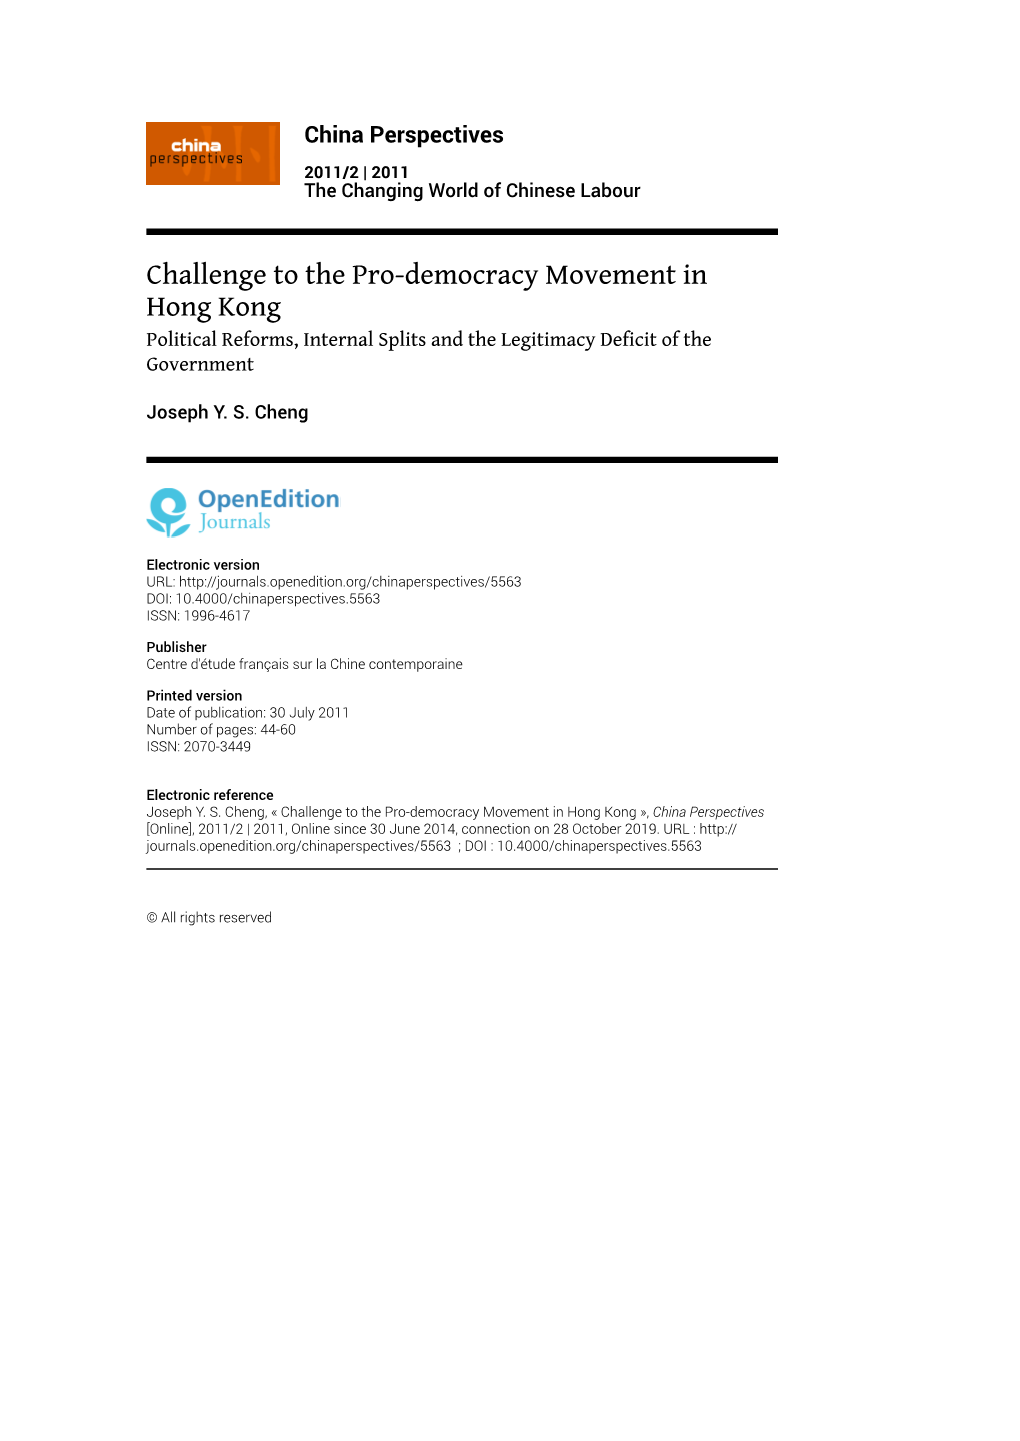 Challenge to the Pro-Democracy Movement in Hong Kong Political Reforms, Internal Splits and the Legitimacy Deficit of the Government